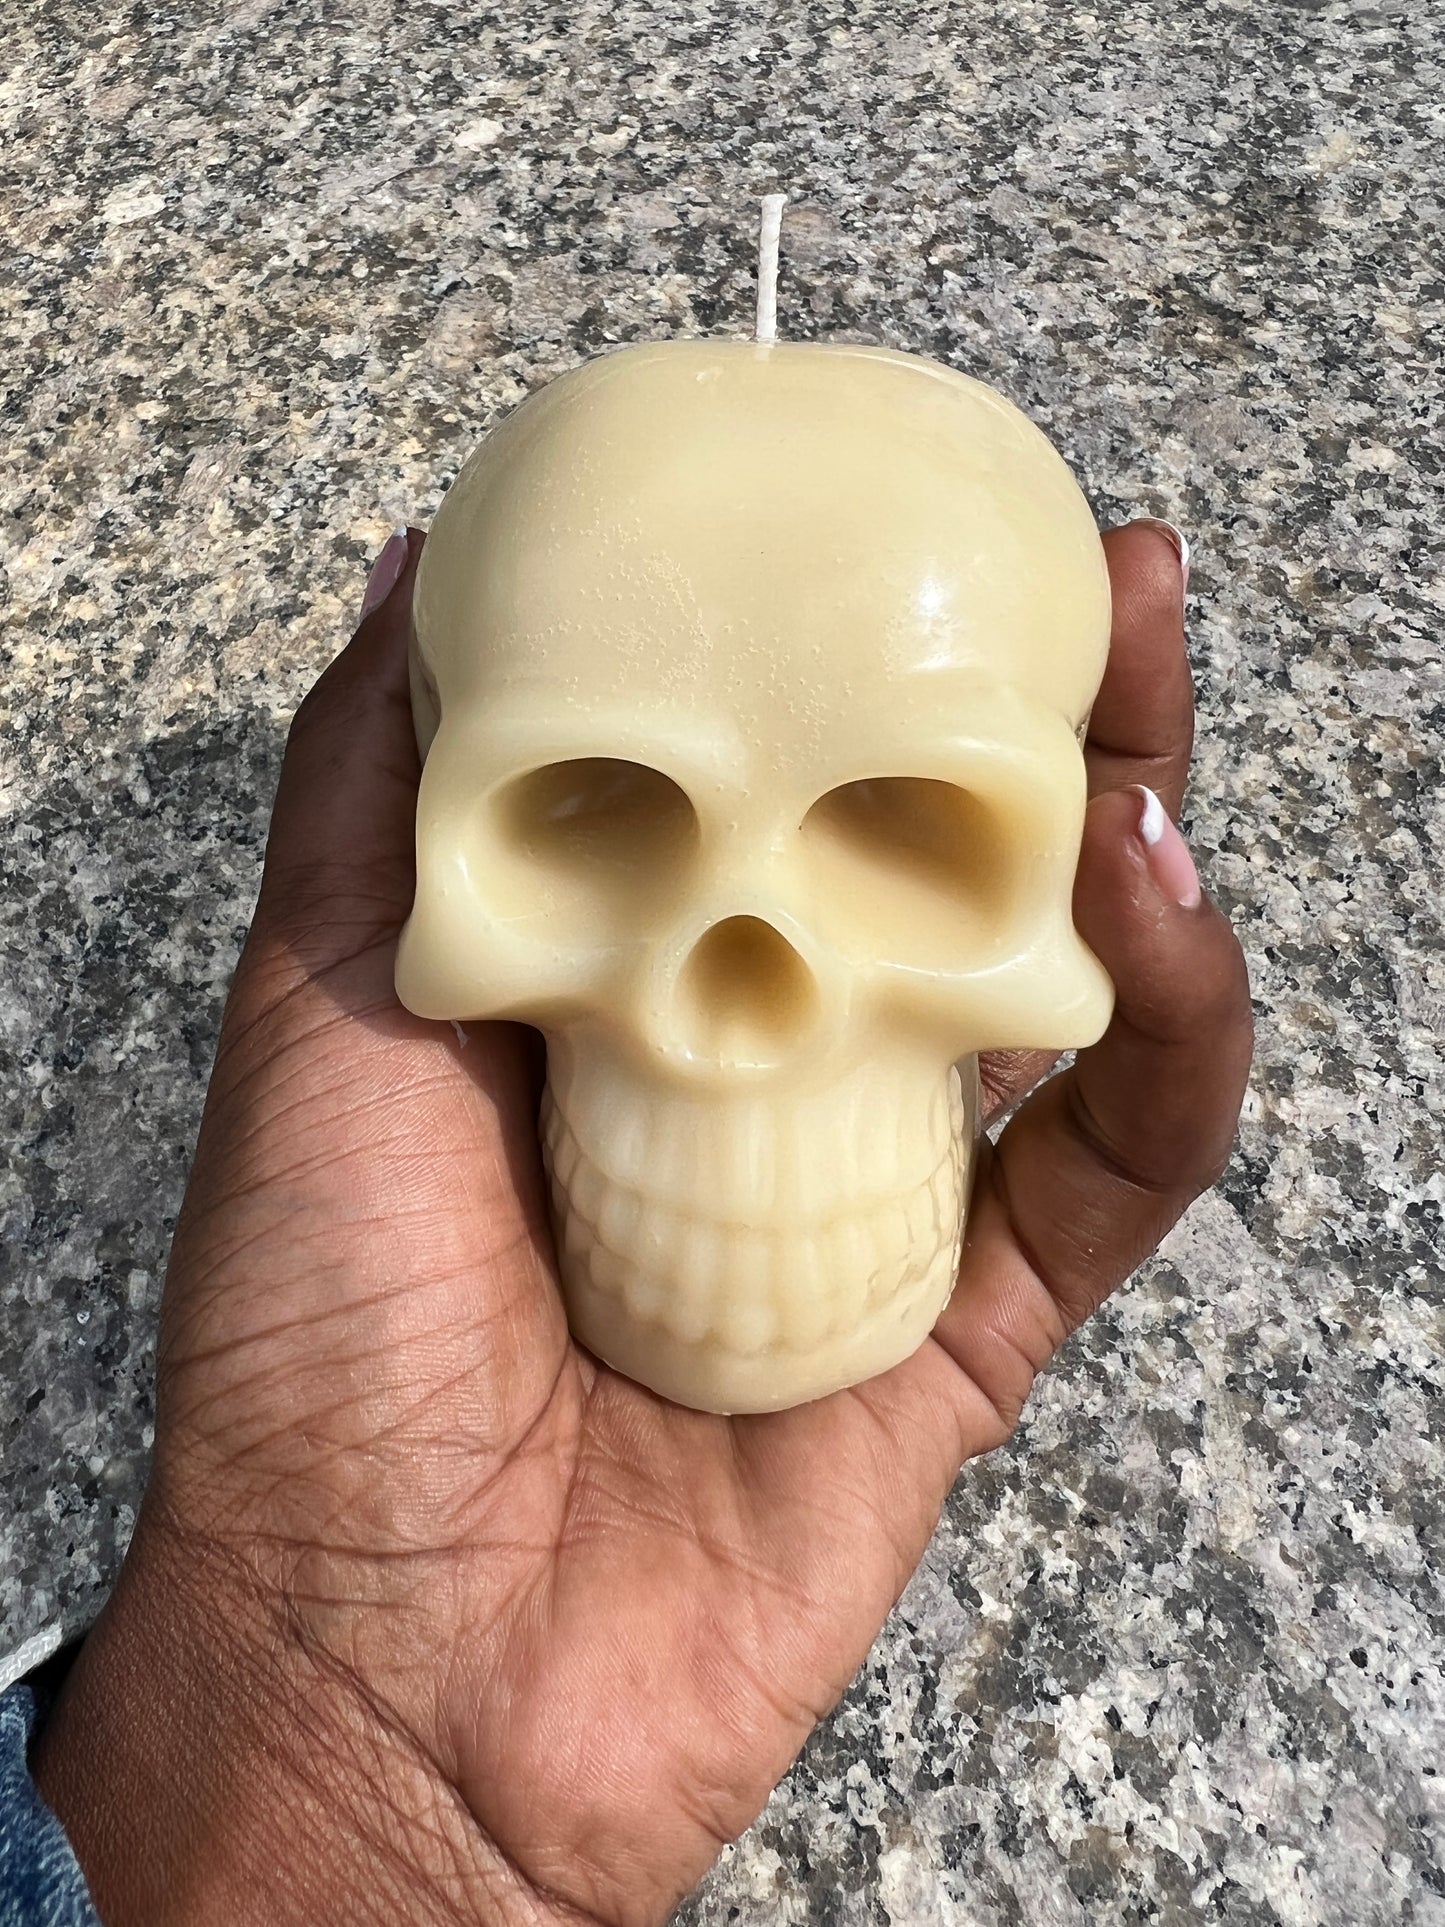 Beeswax Skull Candle